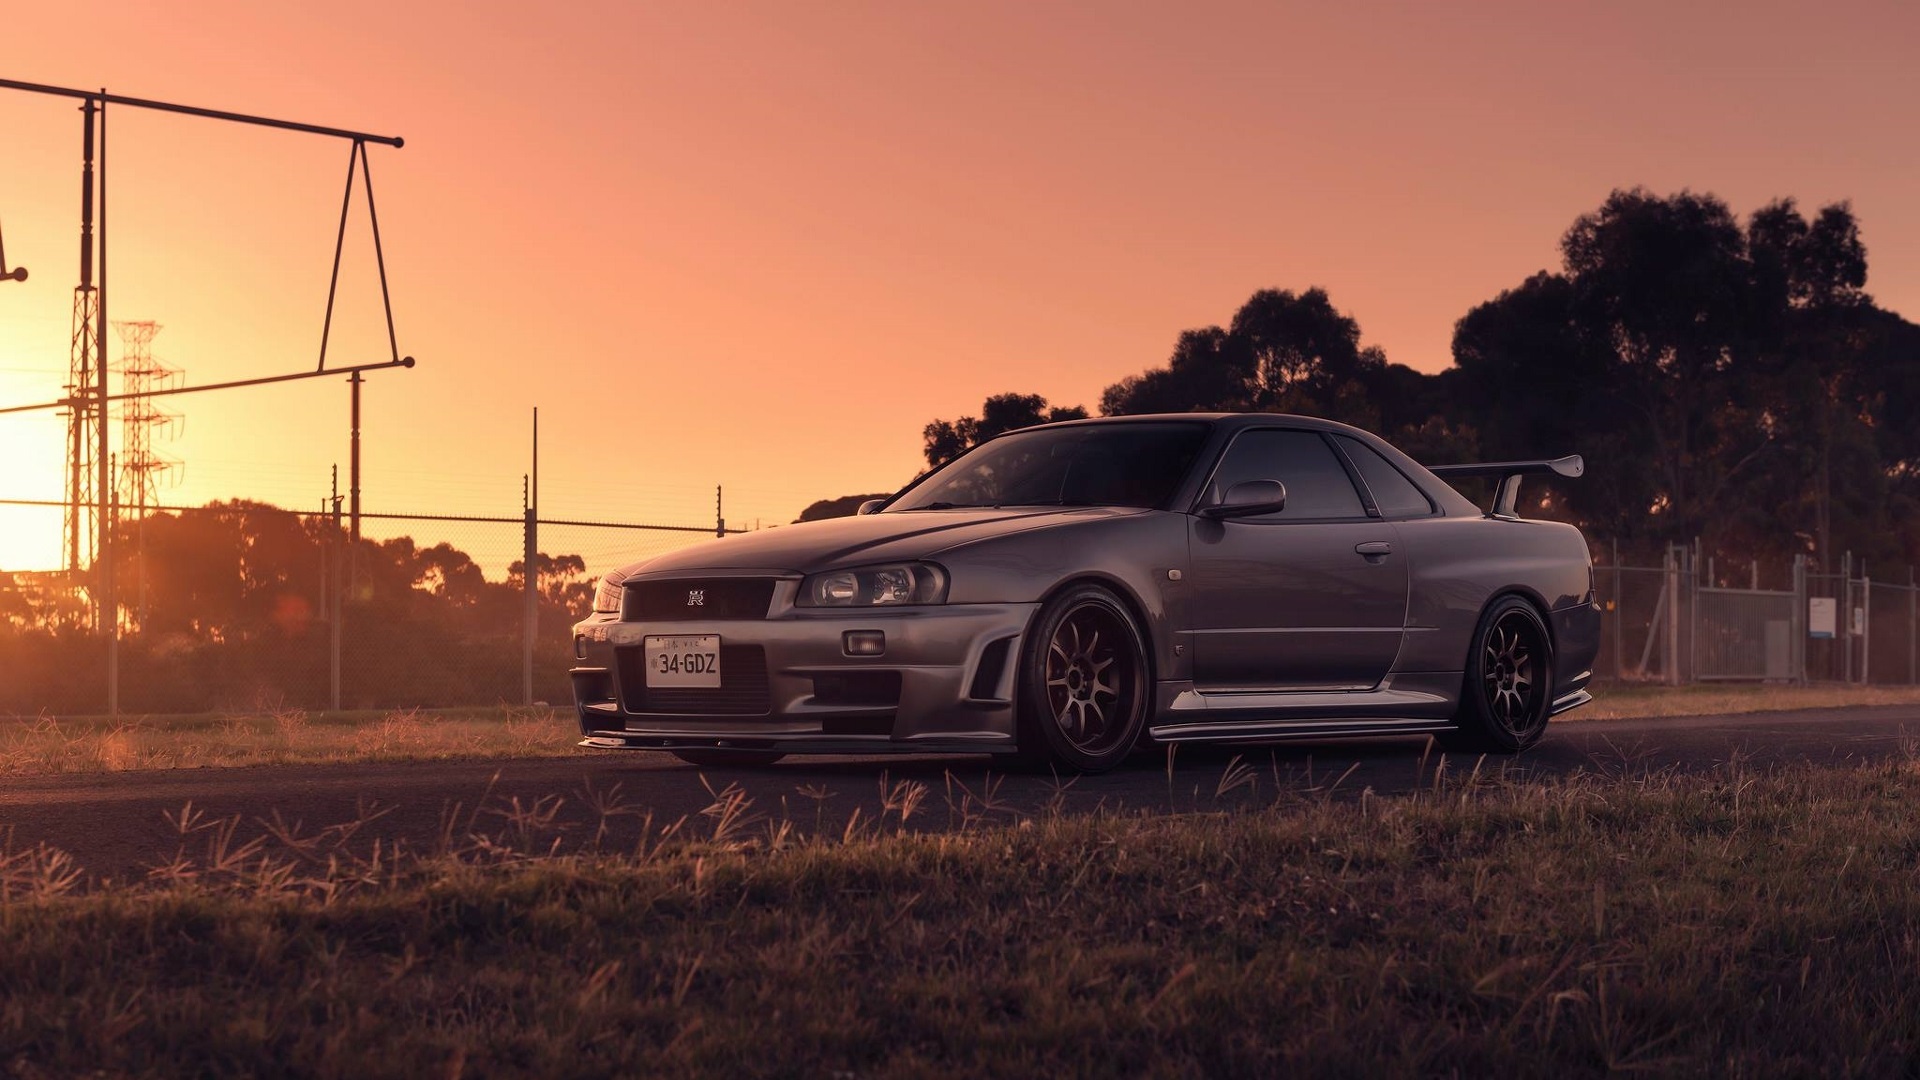 General 1920x1080 Nissan Skyline R34 Nissan Skyline Nissan Japanese cars car vehicle gray cars silver cars sunset road trees grass sports car outdoors PT works